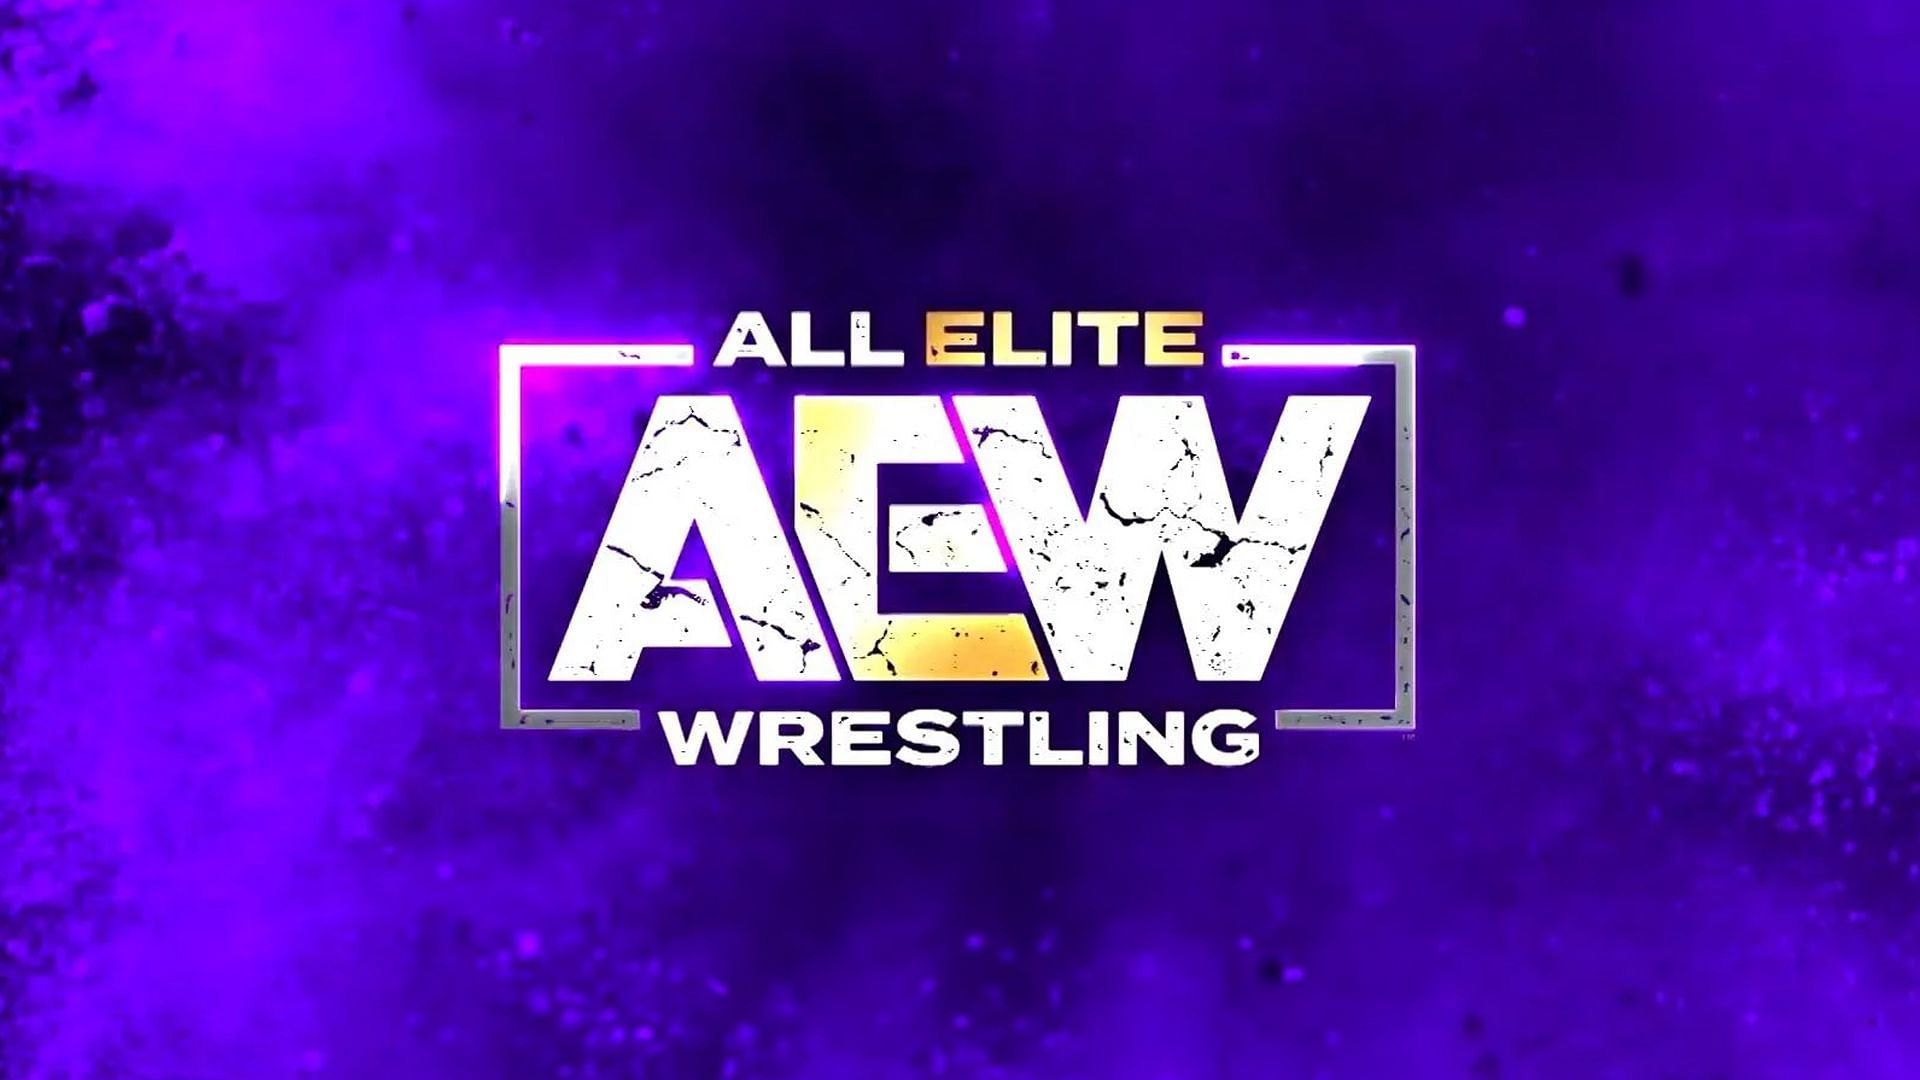 All Elite Wrestling currently runs three weekly television shows